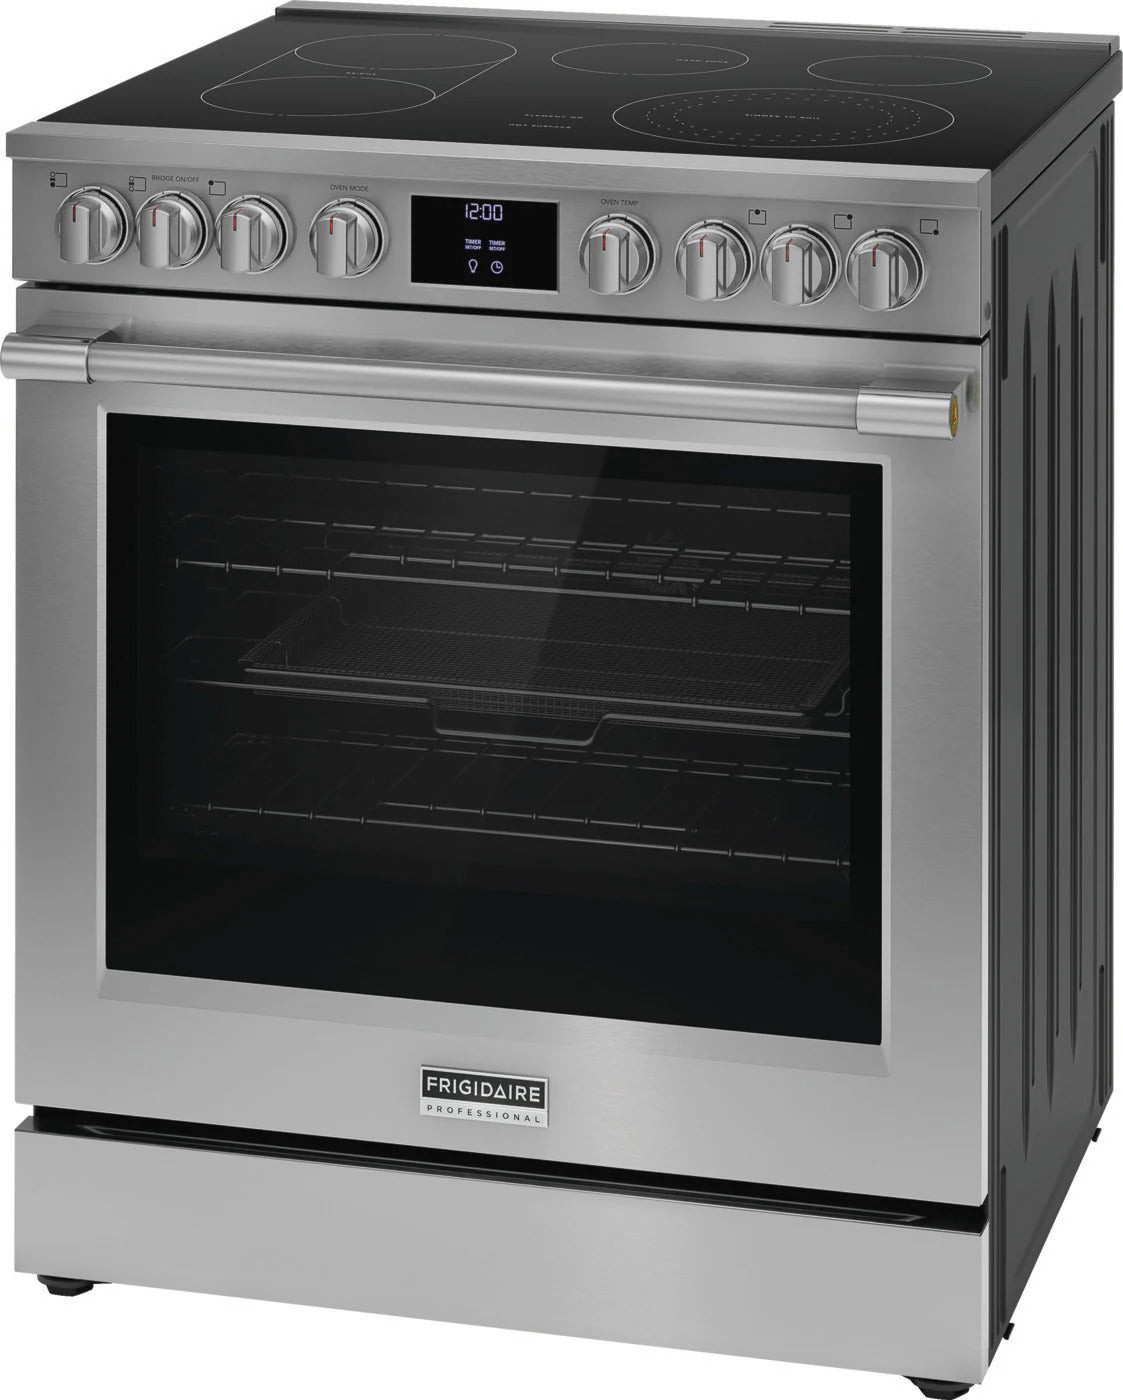 Frigidaire Pro Series - 5.4 cu. ft  Electric Range in Stainless - PCFE308CAF